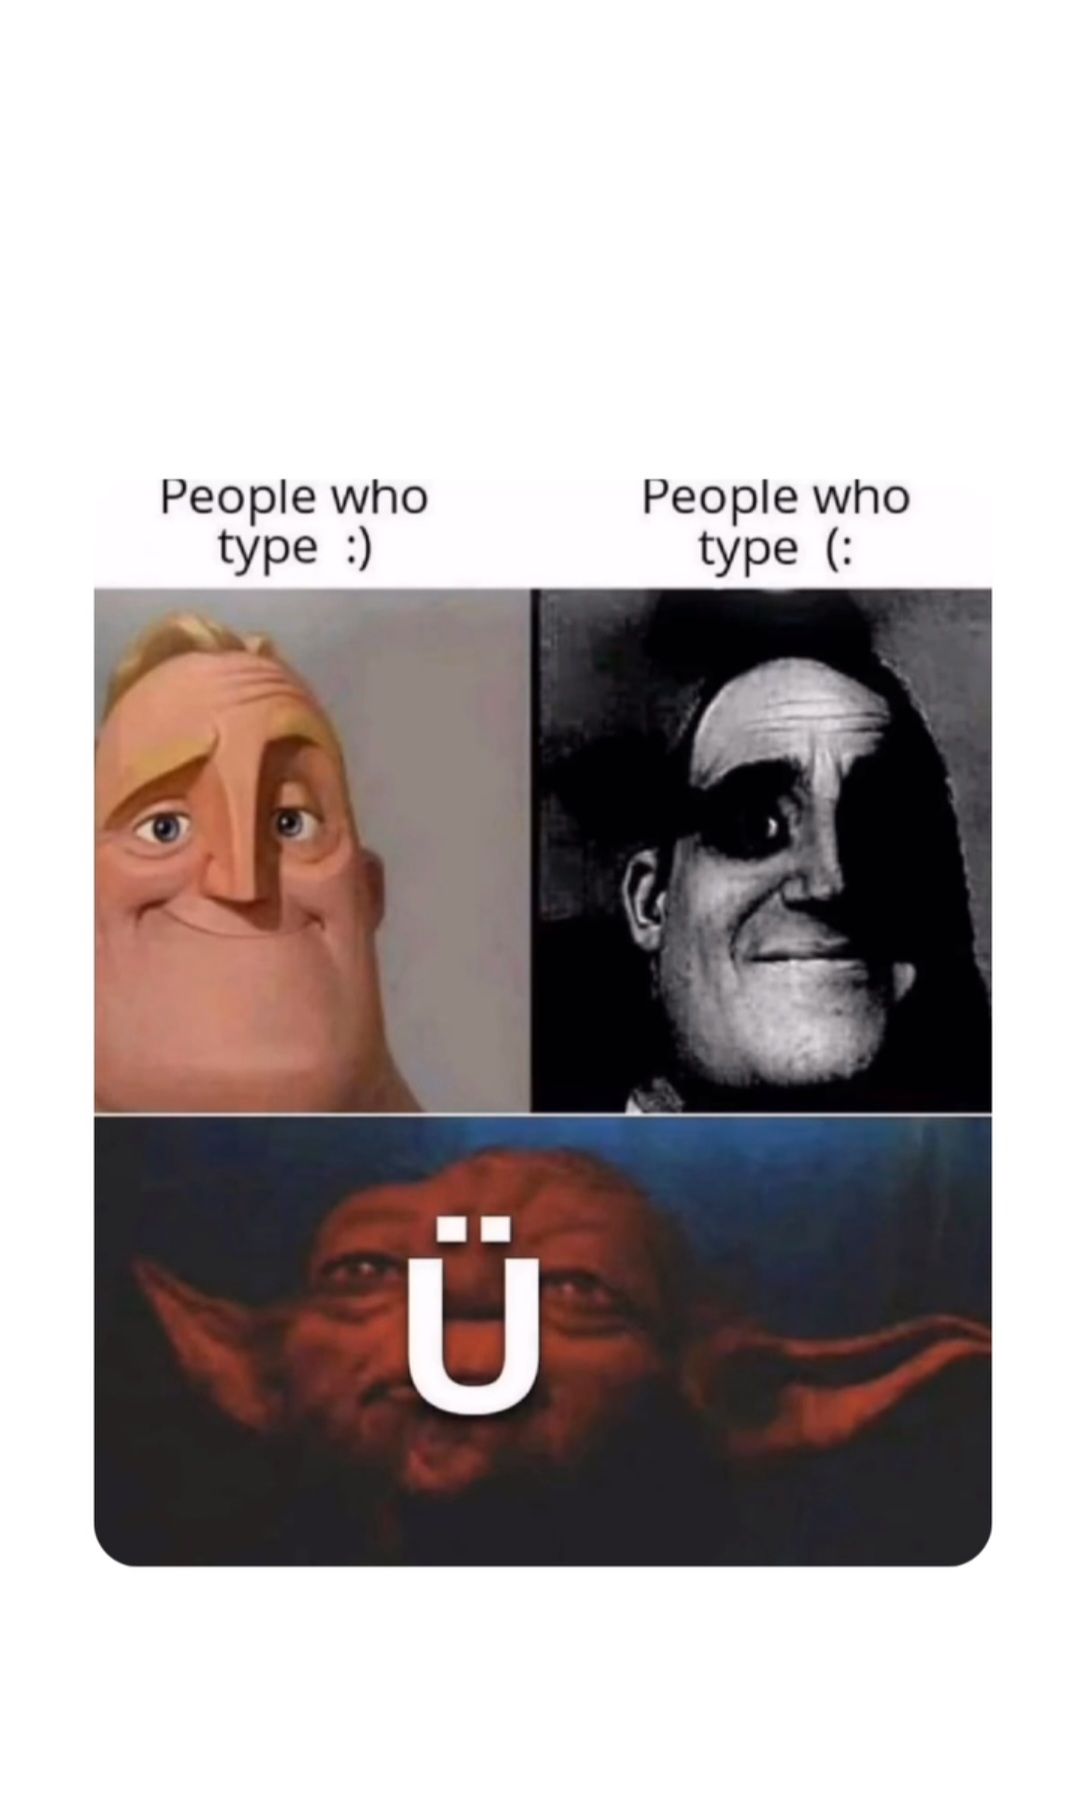 People who
type :)
D
People who
type (: